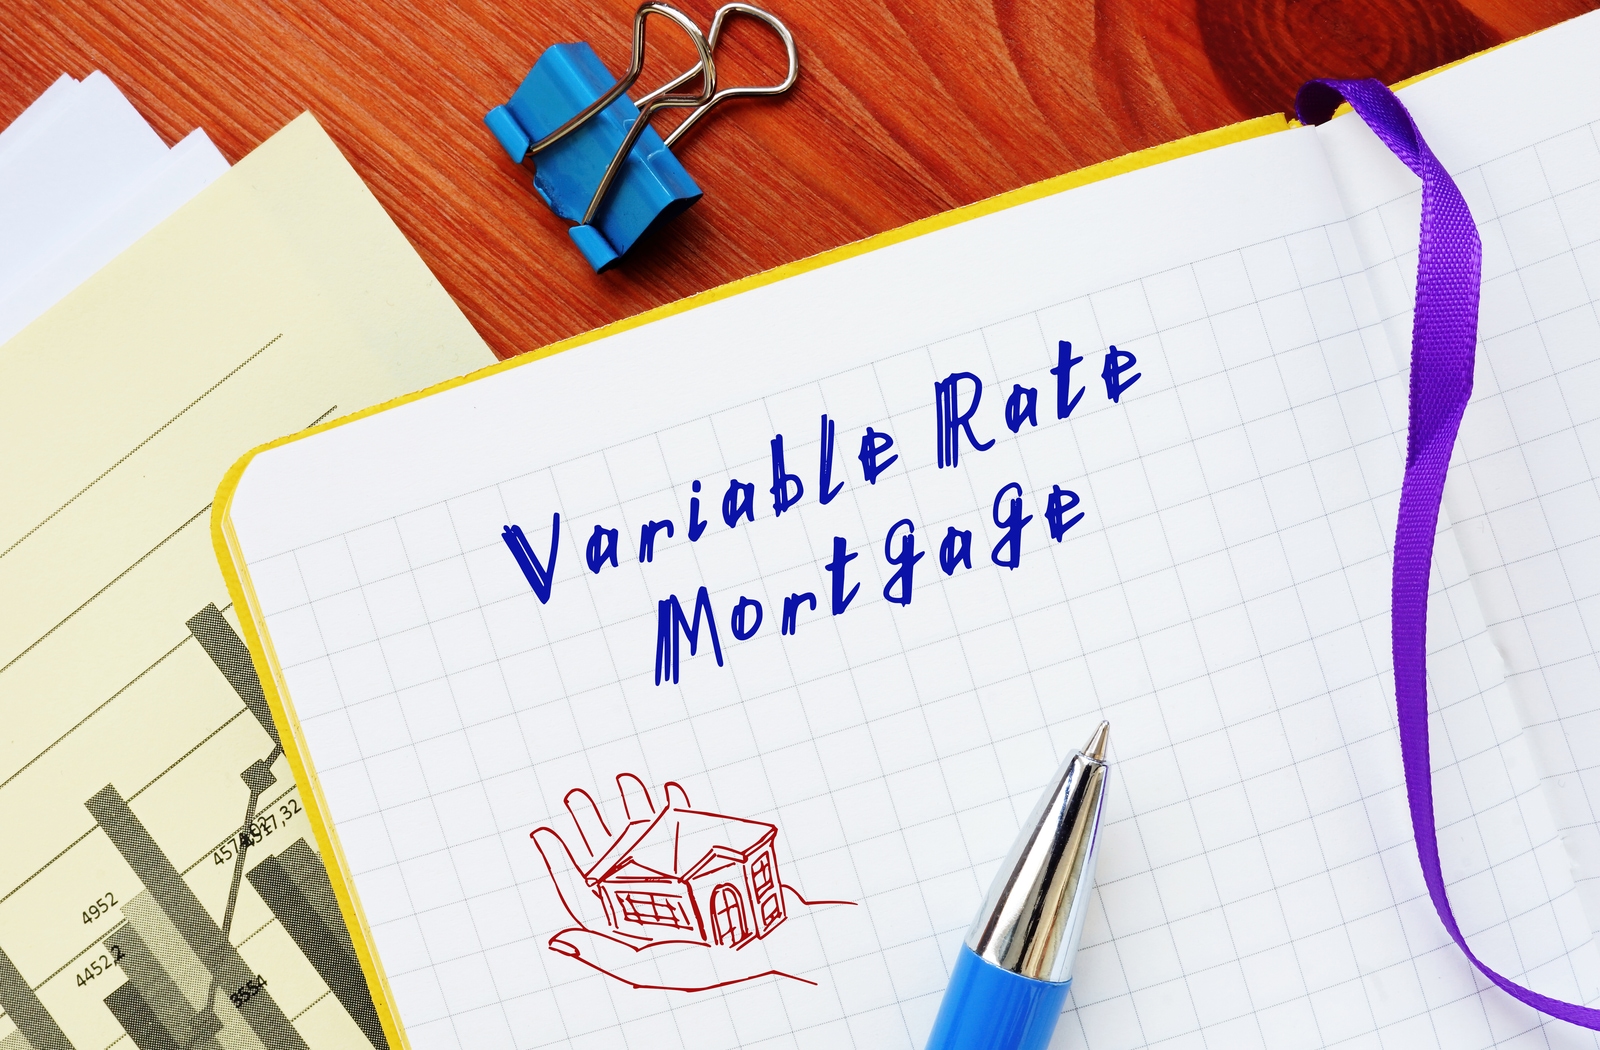 A notepad with the words "variable rate mortgage" written on the page beside a drawing of a hand holding a small house